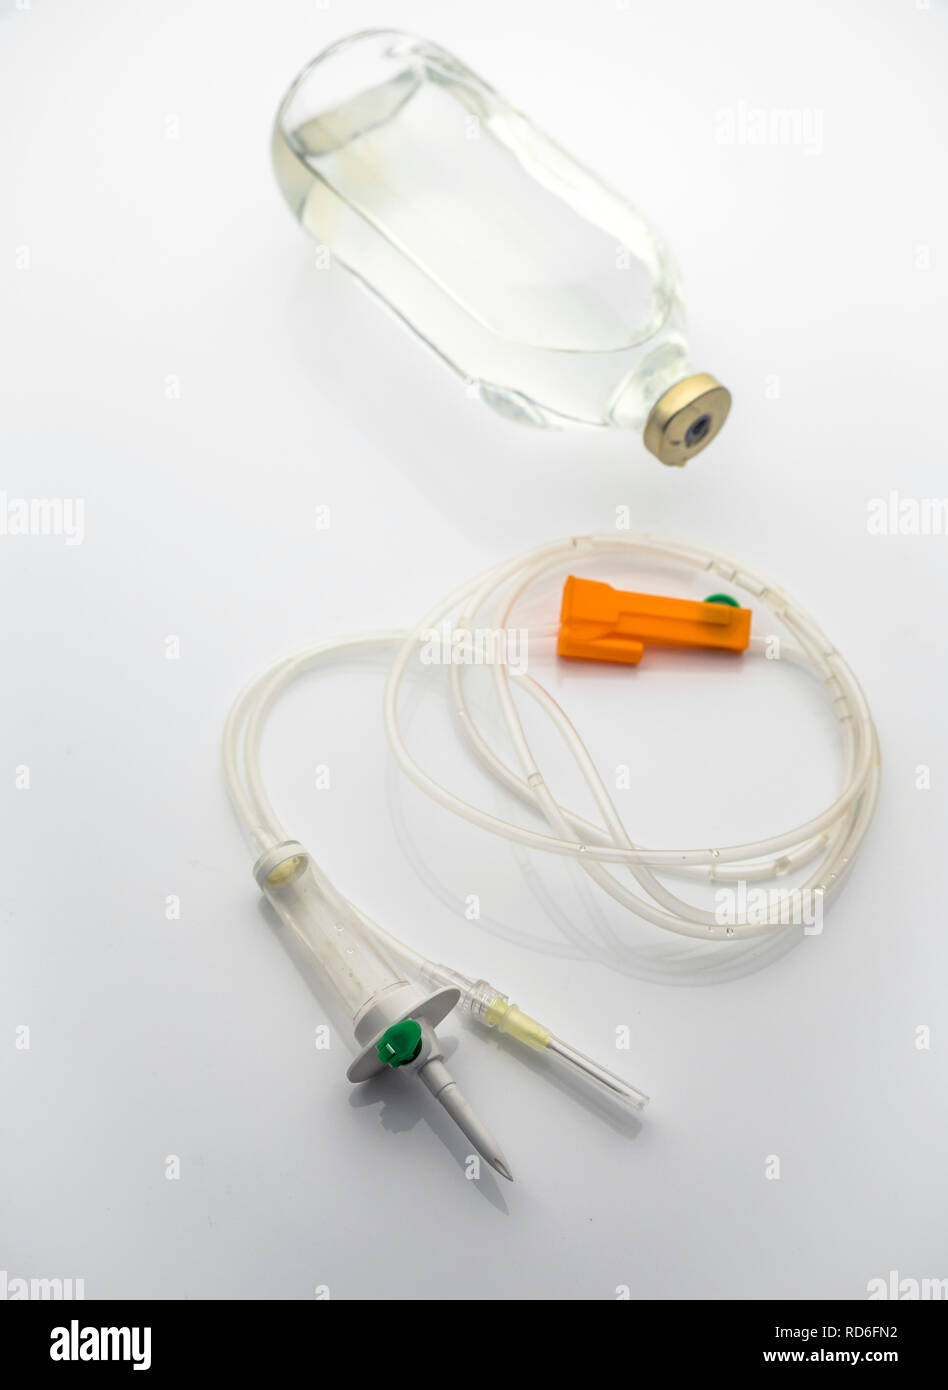 Physiological serum drip irrigation equipment, conceptual image Stock Photo